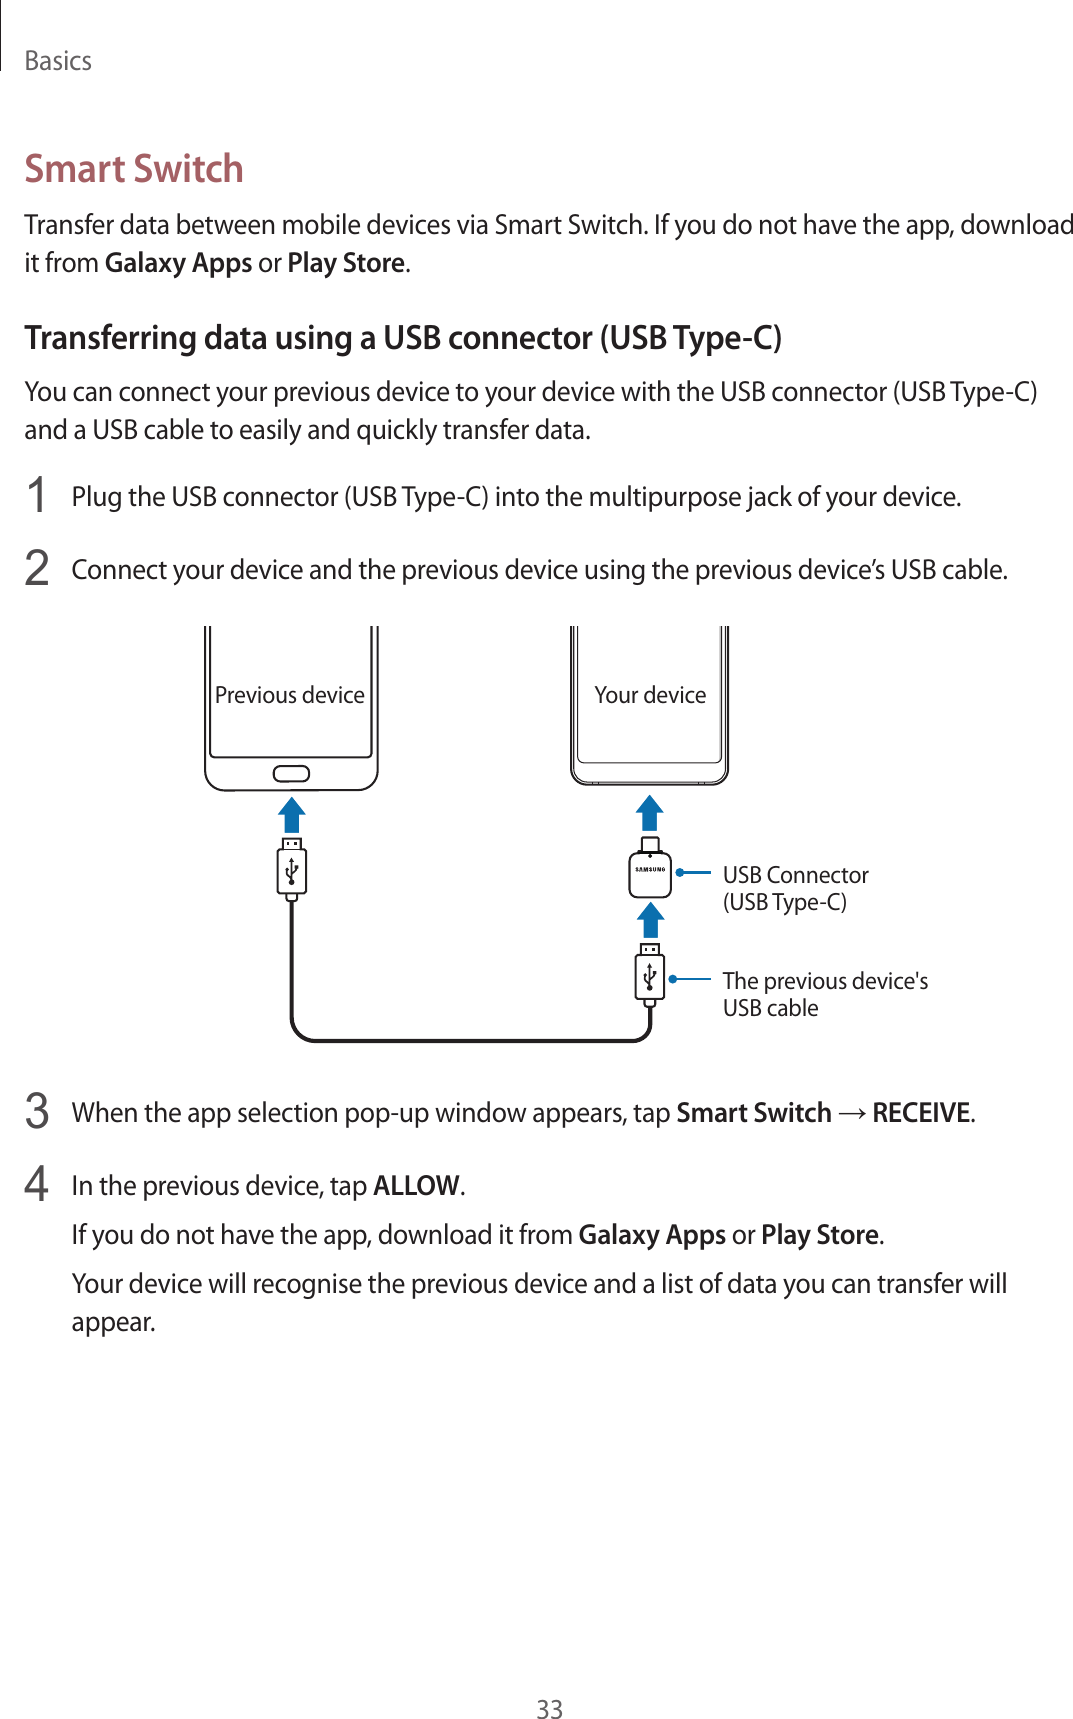 Basics33Smart SwitchTransfer data between mobile devices via Smart Switch. If you do not have the app, download it from Galaxy Apps or Play Store.Transferring data using a USB connector (USB Type-C)You can connect your previous device to your device with the USB connector (USB Type-C) and a USB cable to easily and quickly transfer data.1  Plug the USB connector (USB Type-C) into the multipurpose jack of your device.2  Connect your device and the previous device using the previous device’s USB cable.USB Connector (USB Type-C)Your devicePrevious deviceThe previous device&apos;s USB cable3  When the app selection pop-up window appears, tap Smart Switch → RECEIVE.4  In the previous device, tap ALLOW.If you do not have the app, download it from Galaxy Apps or Play Store.Your device will recognise the previous device and a list of data you can transfer will appear.